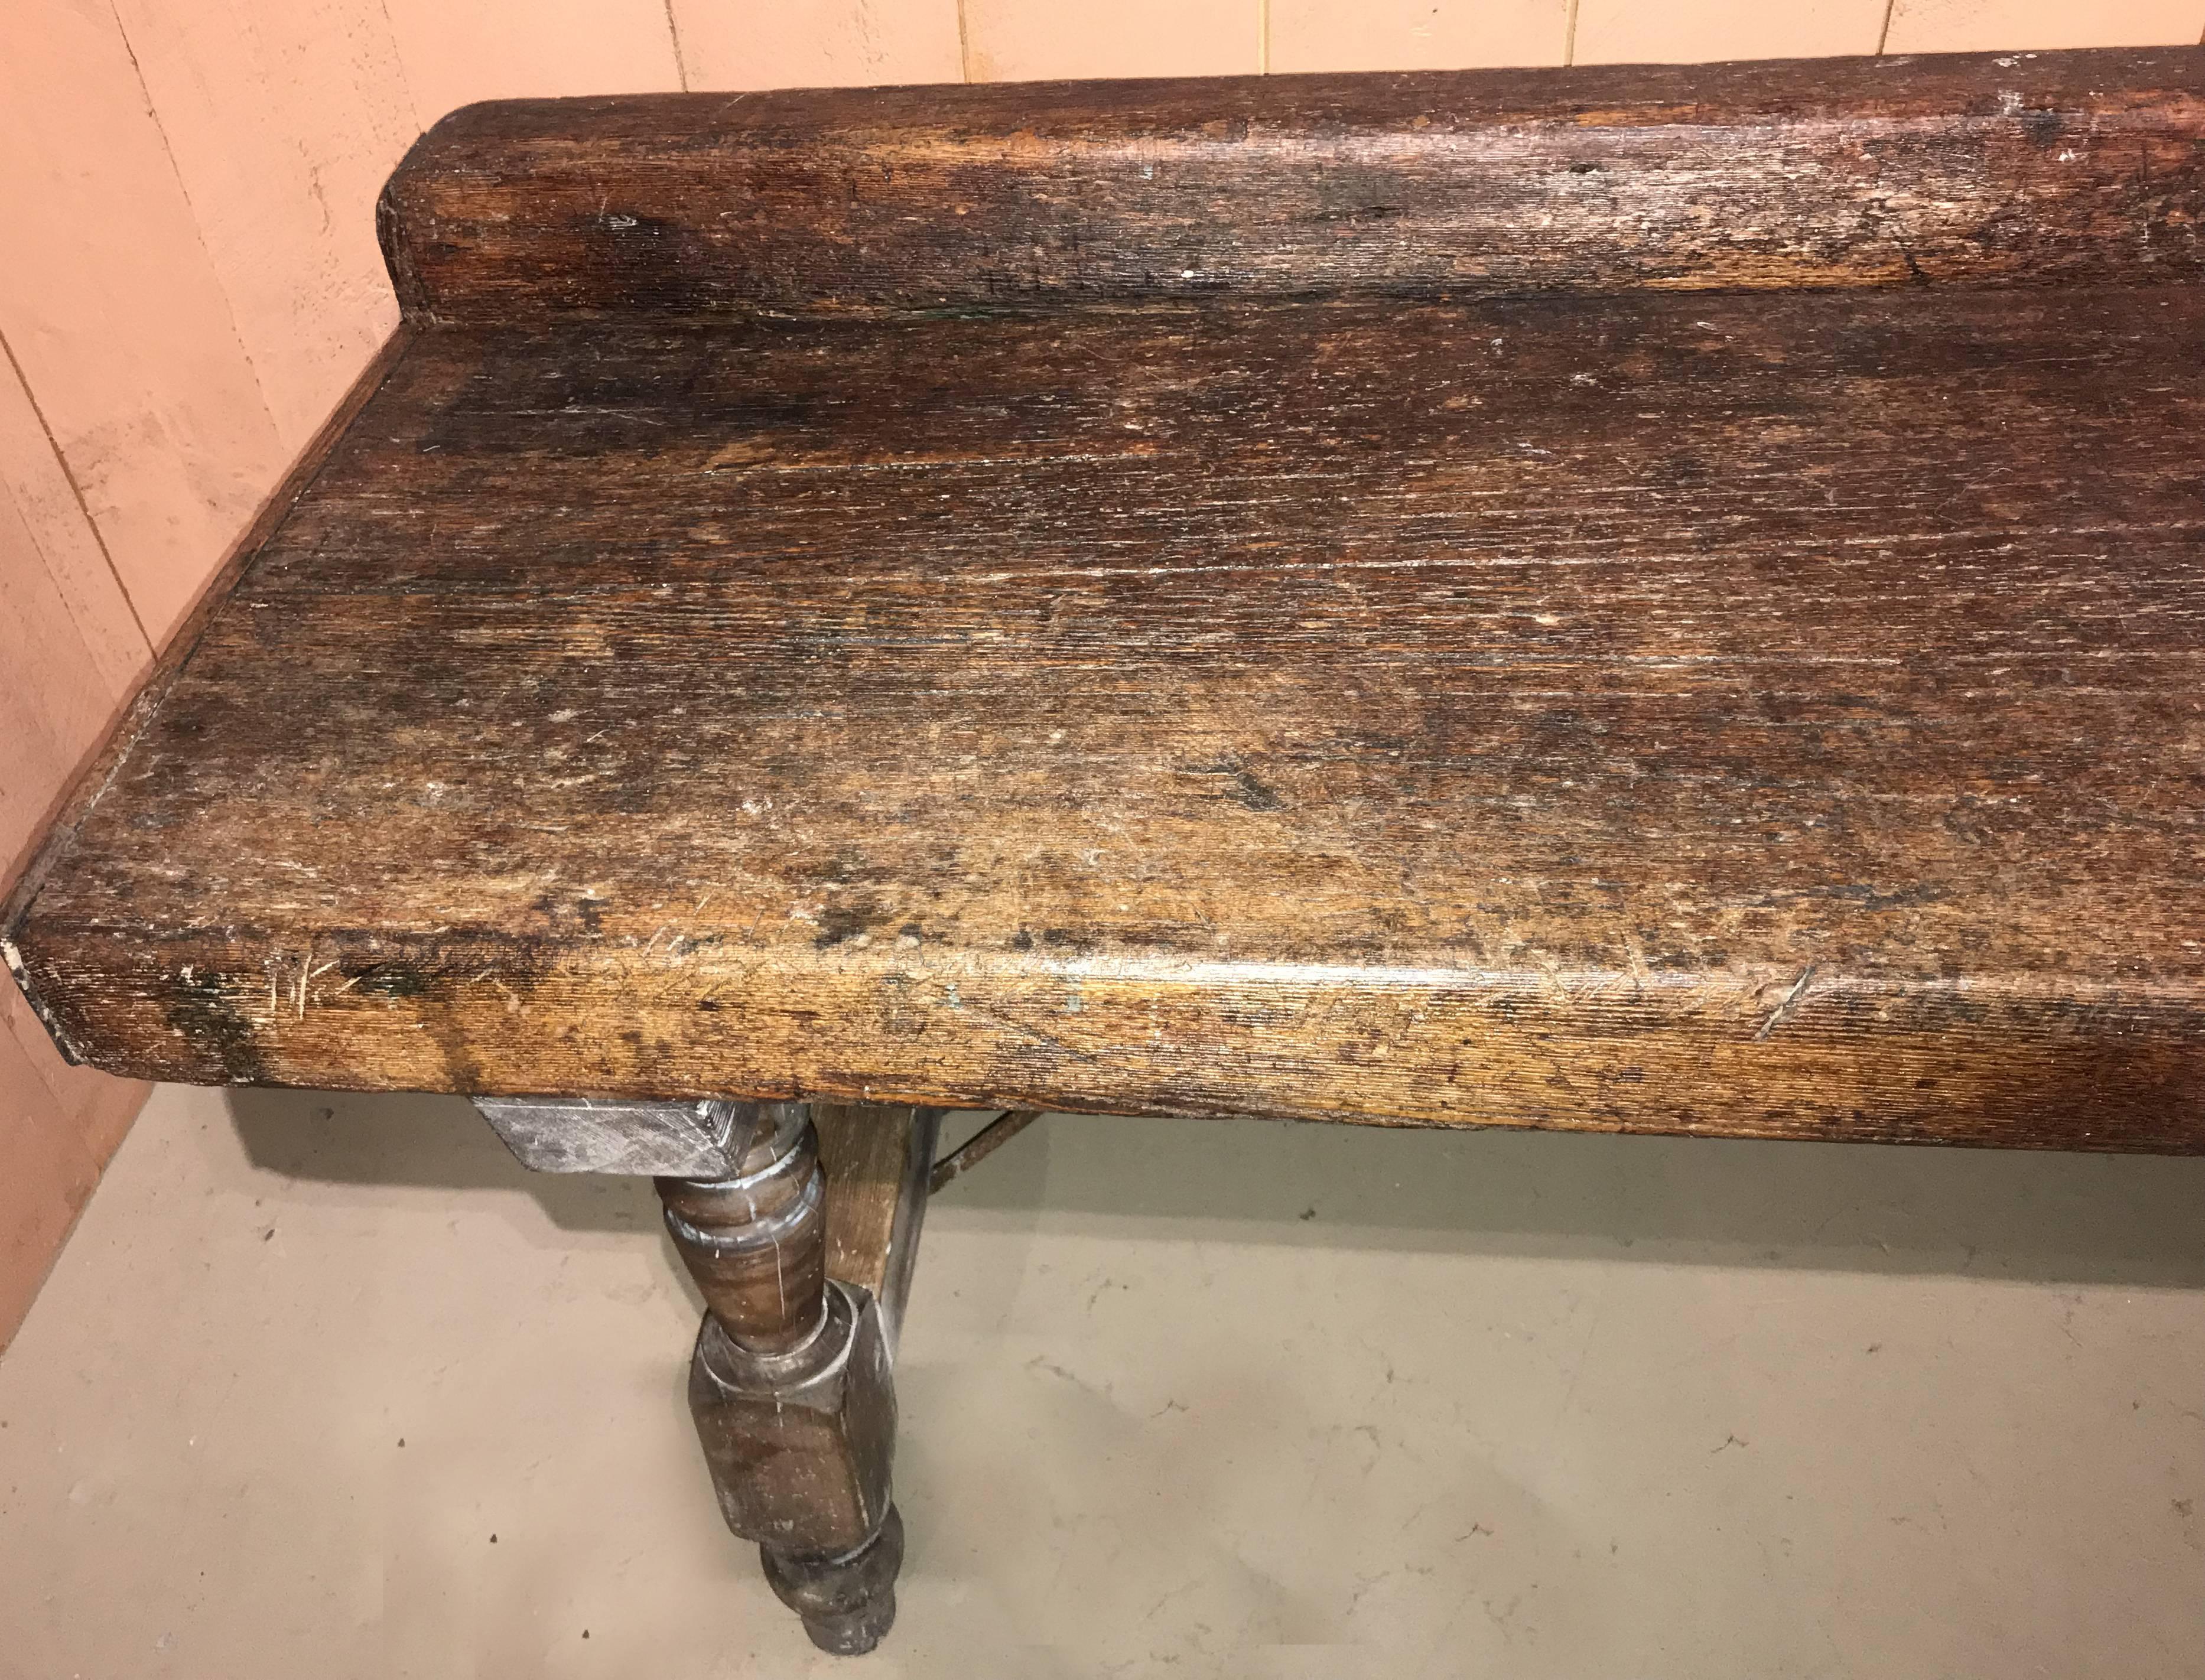 European 19th Century Continental Counter, Workbench, or Server with Crest Rail